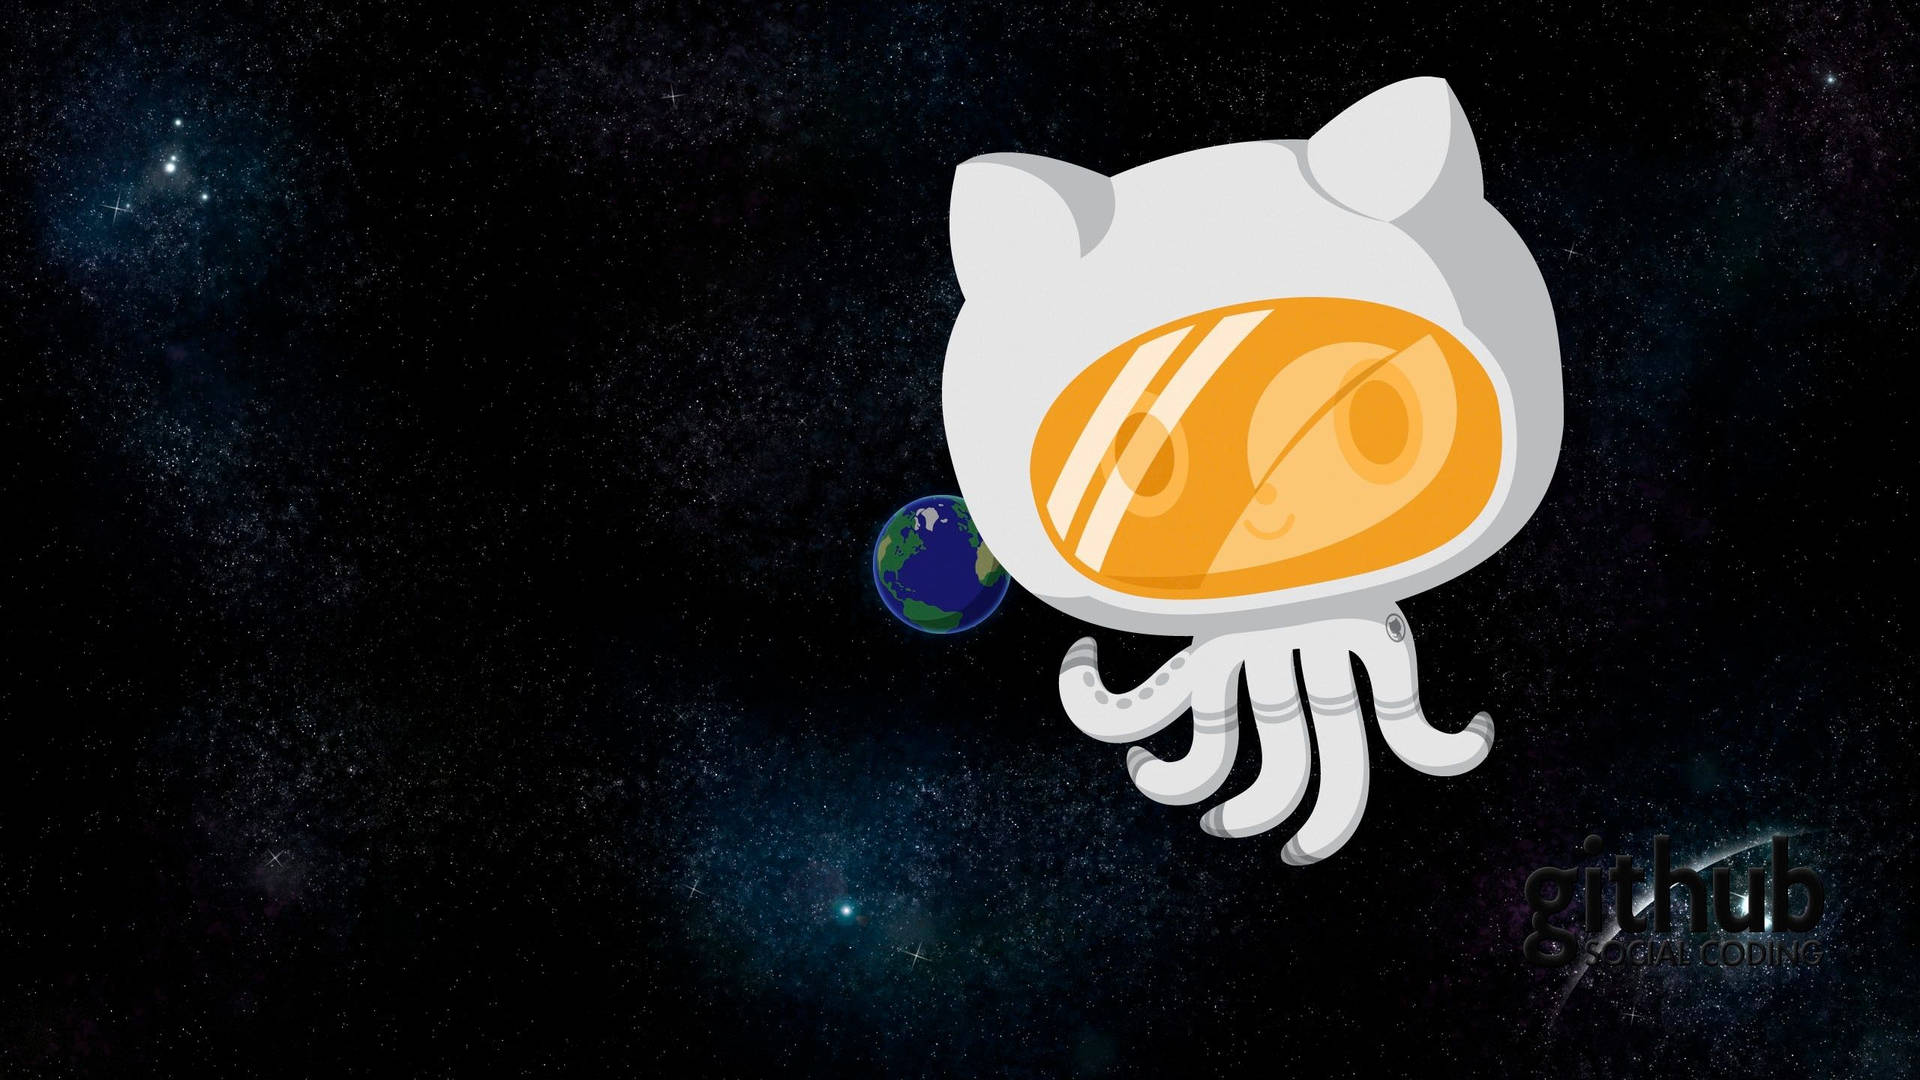 Github 2560X1440 Wallpaper and Background Image